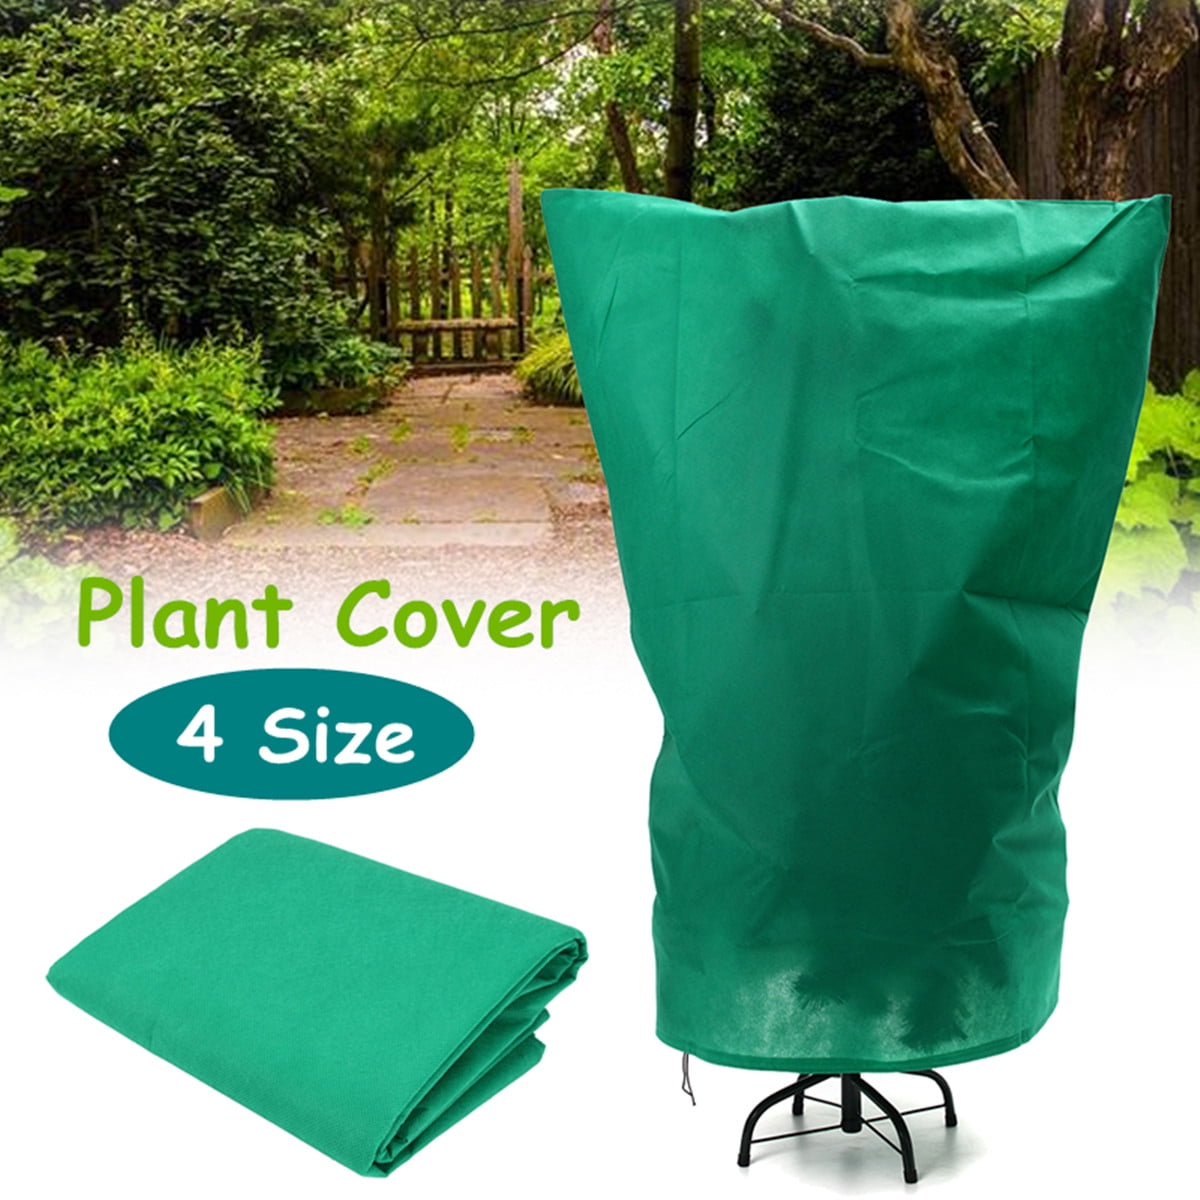 Warm Plant Cover Tree Shrub Frost Winter Protection Bag Jacket Yard Garden 